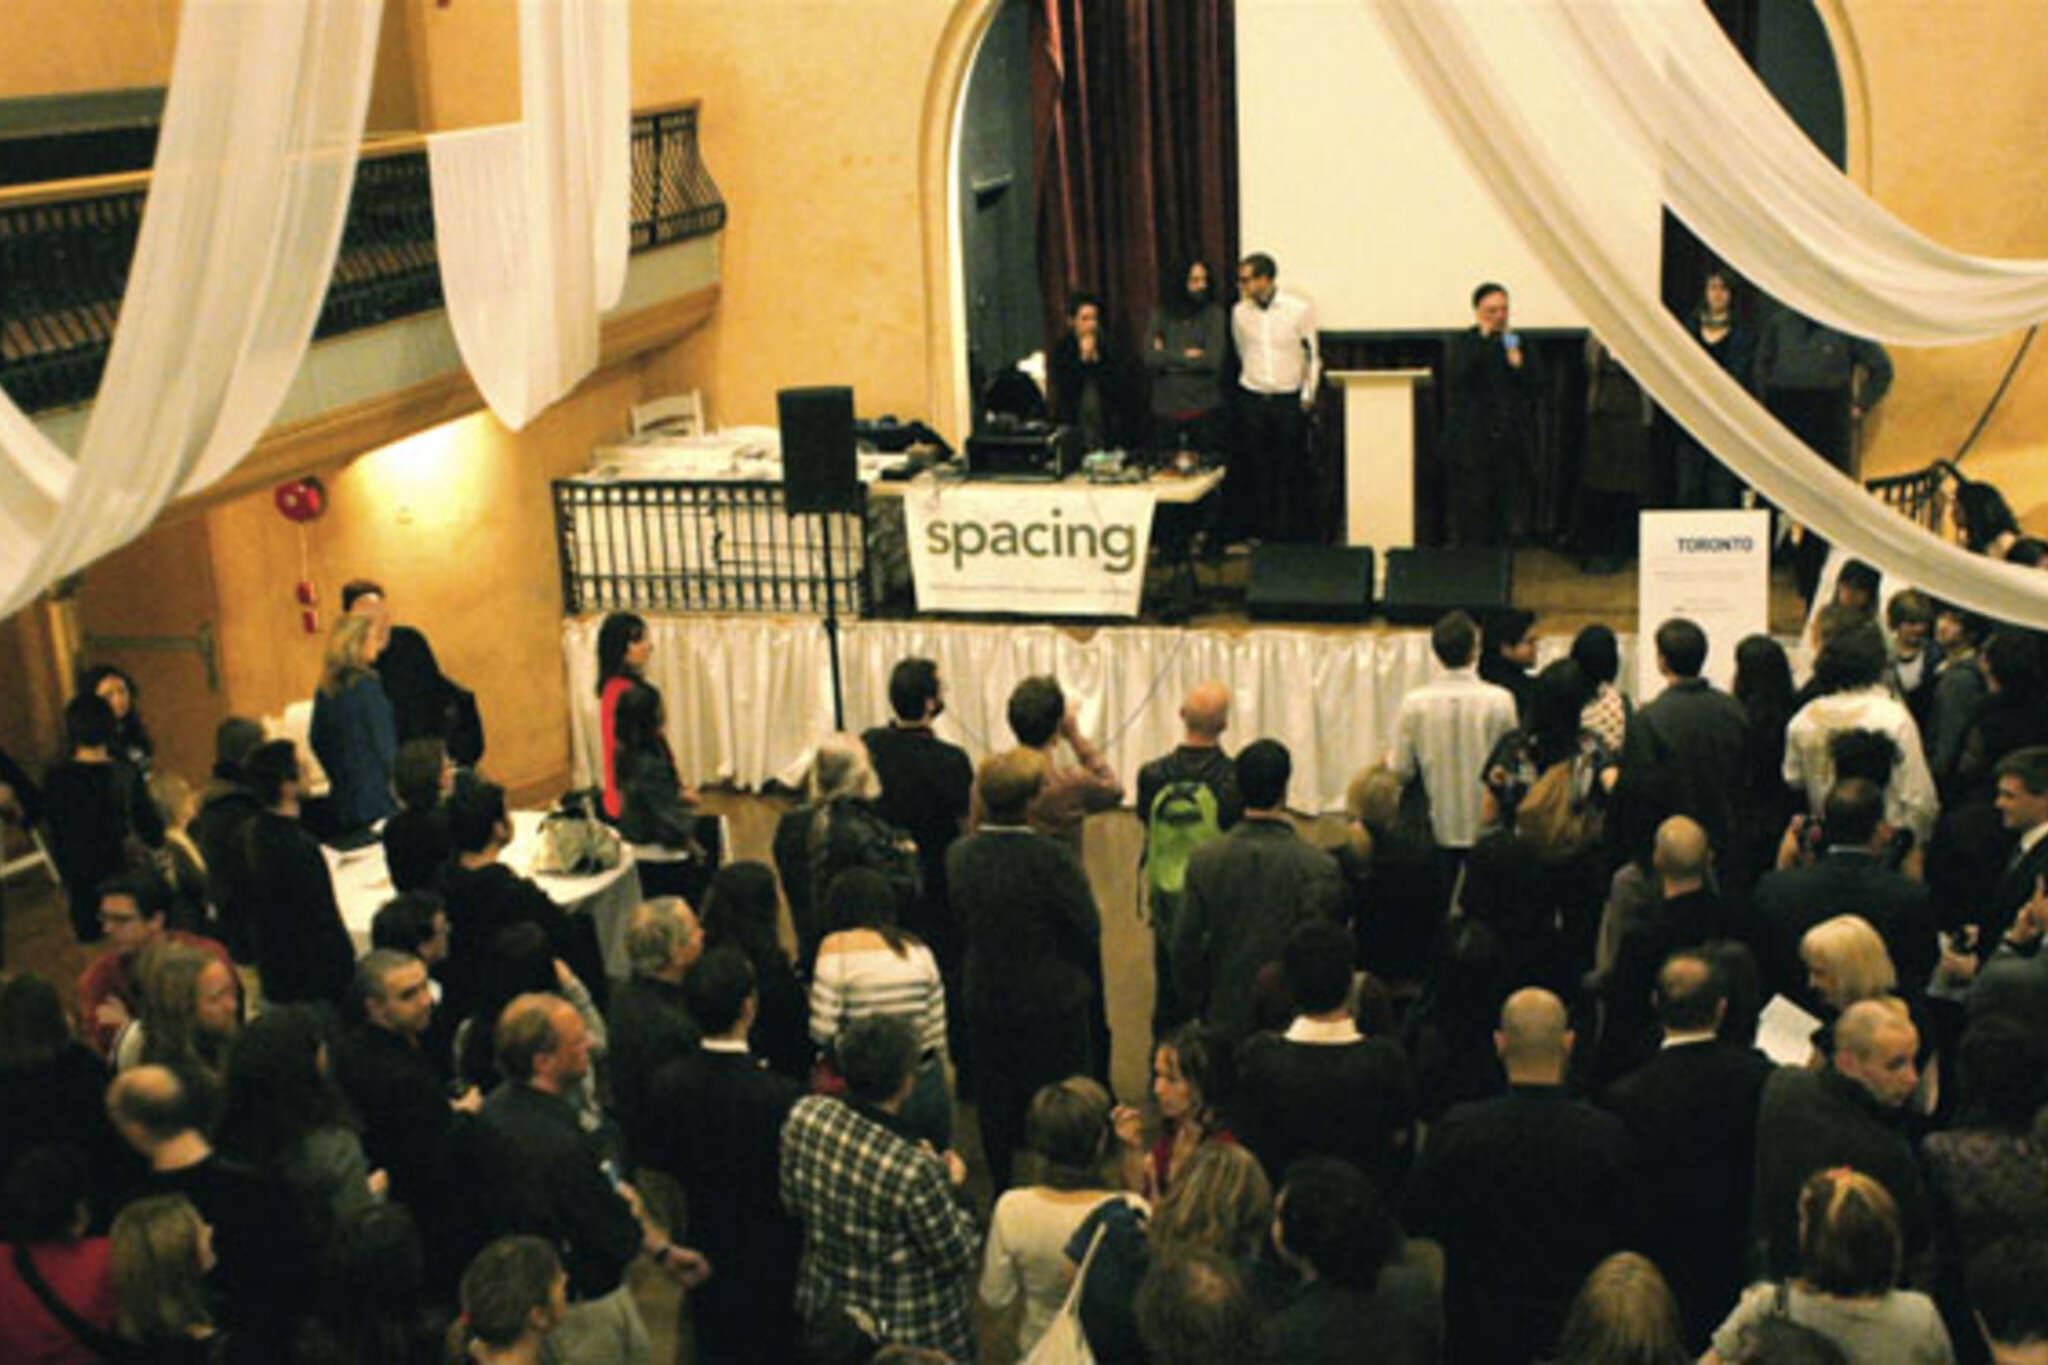 Spacing Magazine had a party at The Great Hall on Queen St. W. to celebrate the Toronto-based publication's fifth anniversary